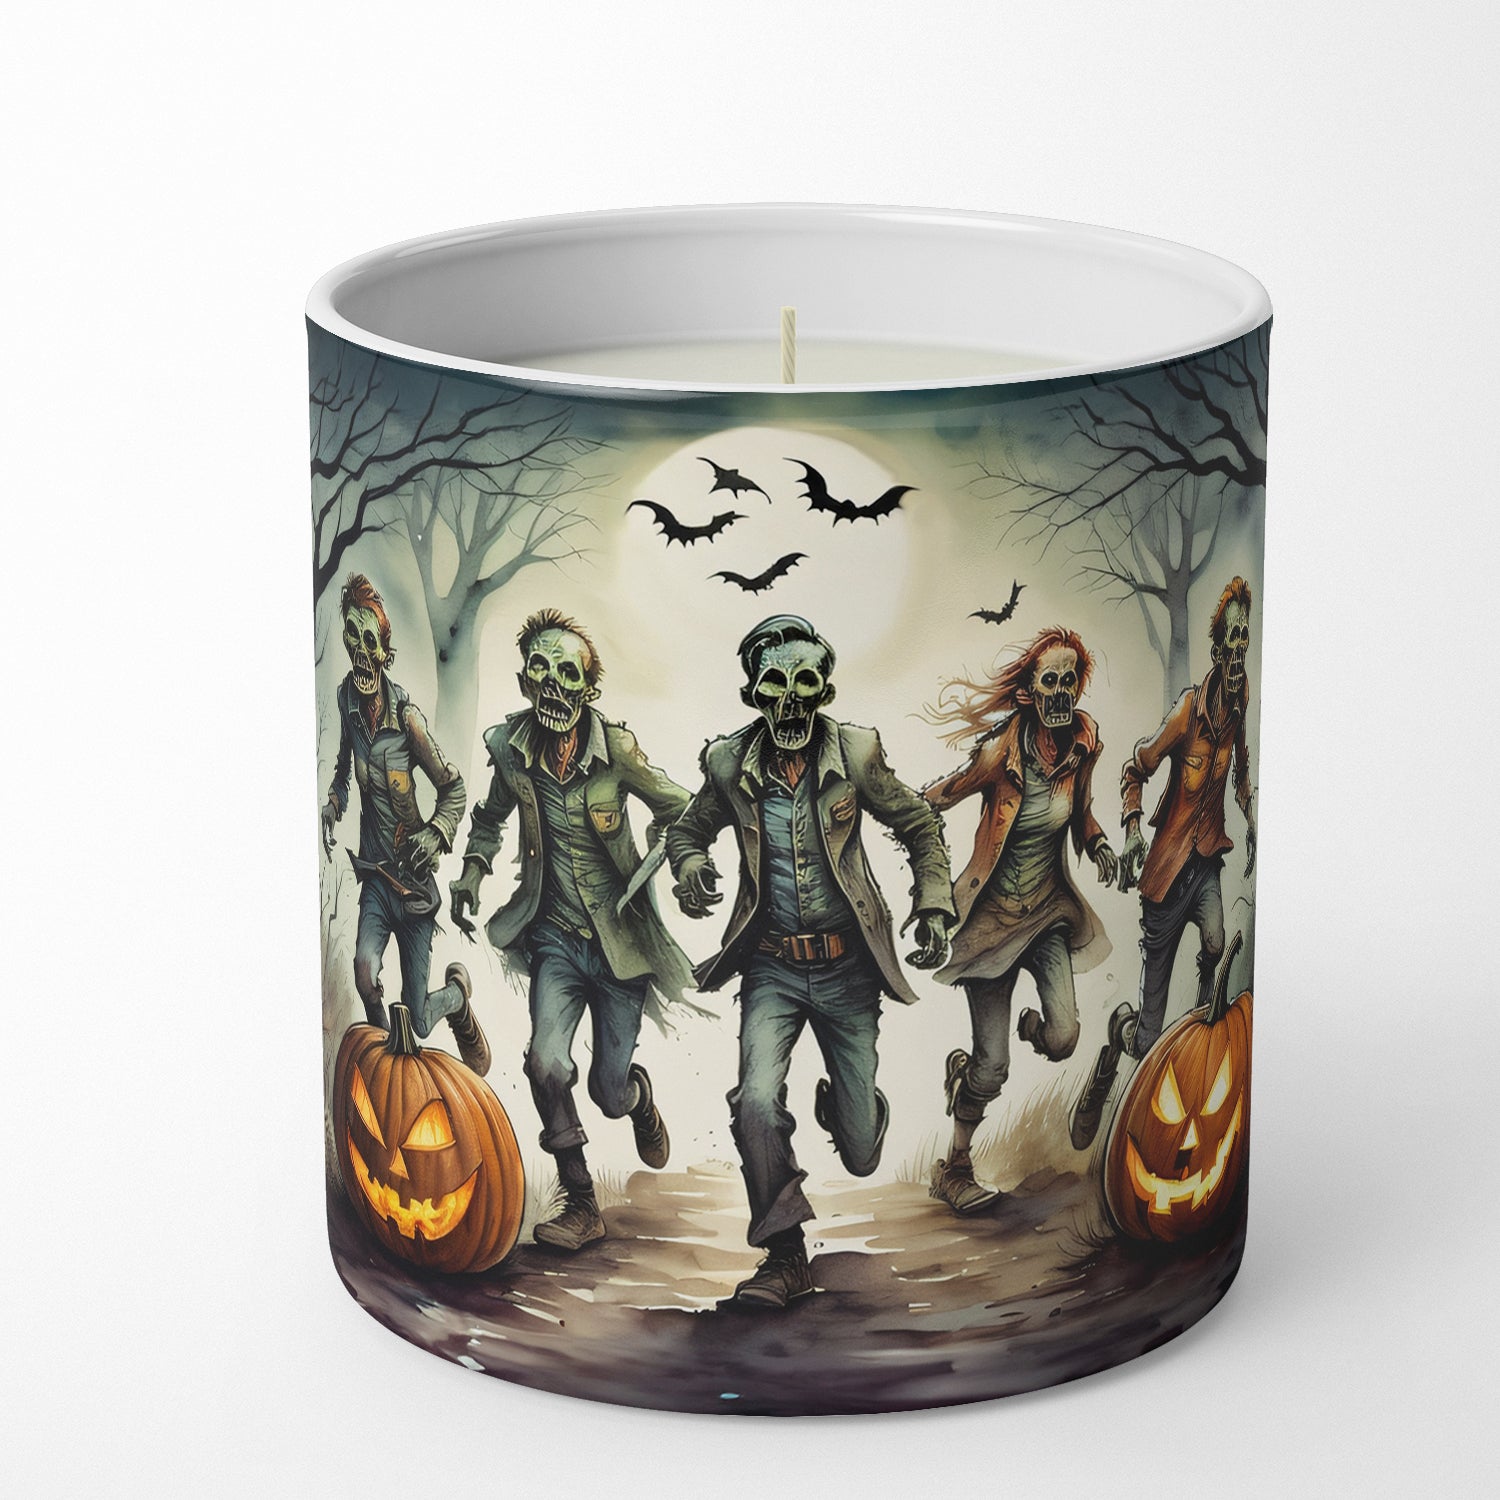 Buy this Zombies Spooky Halloween Decorative Soy Candle